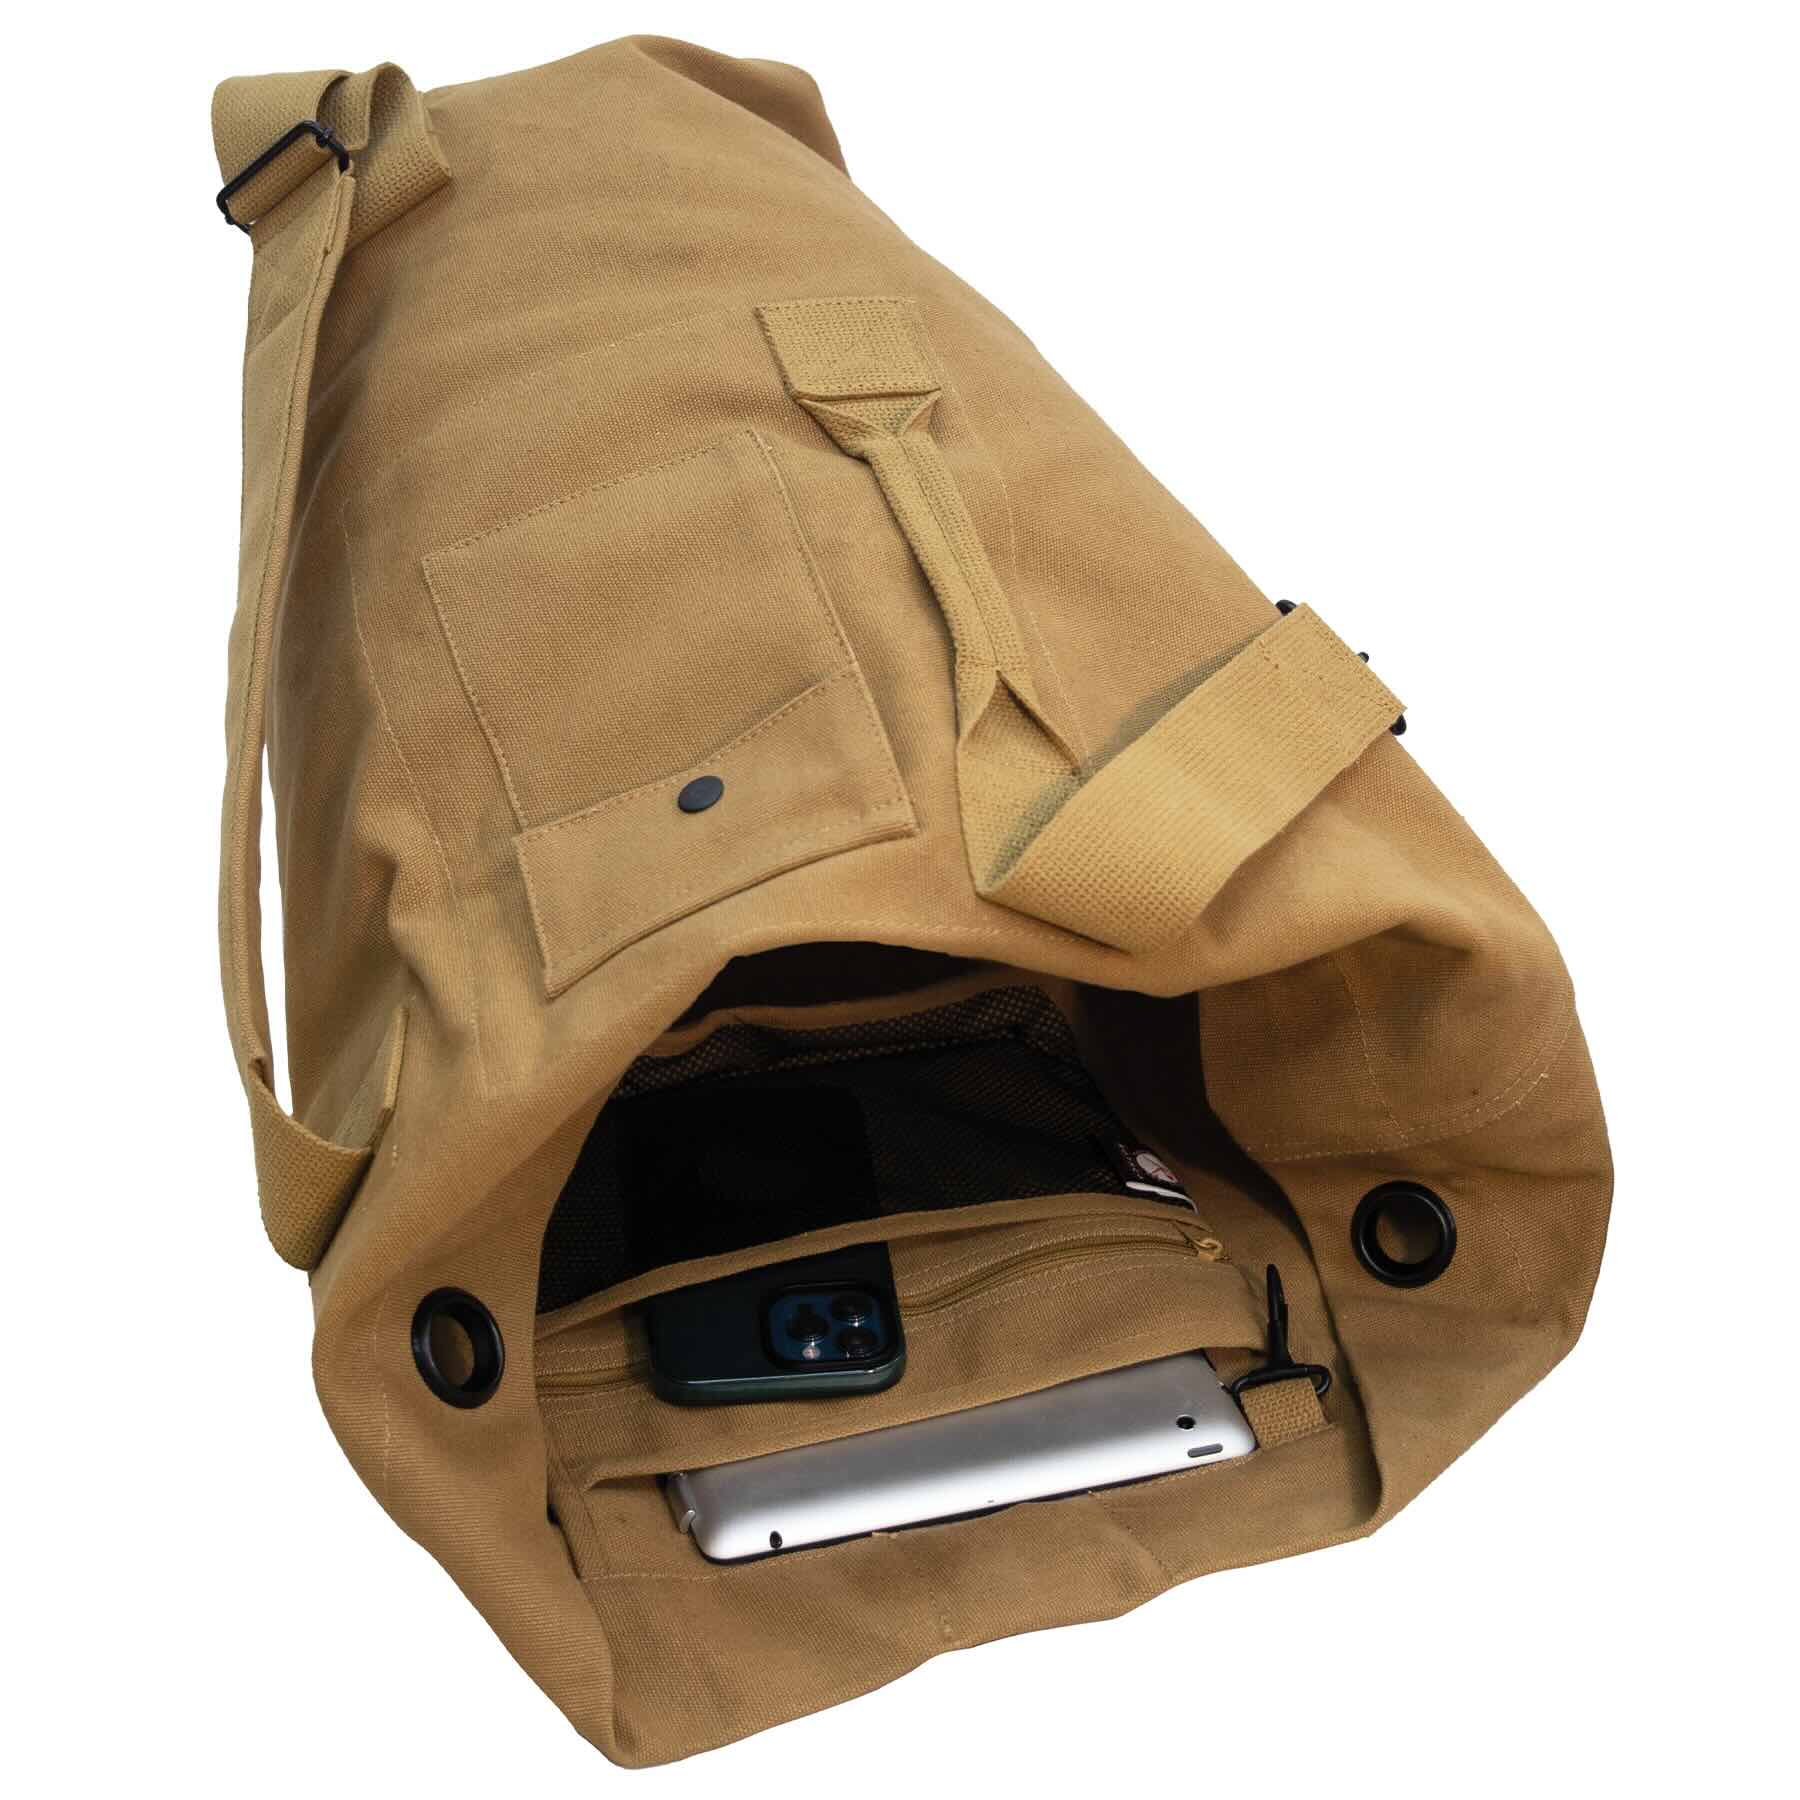 Duffel Bags - Rothco Nomad Canvas Duffle Backpack